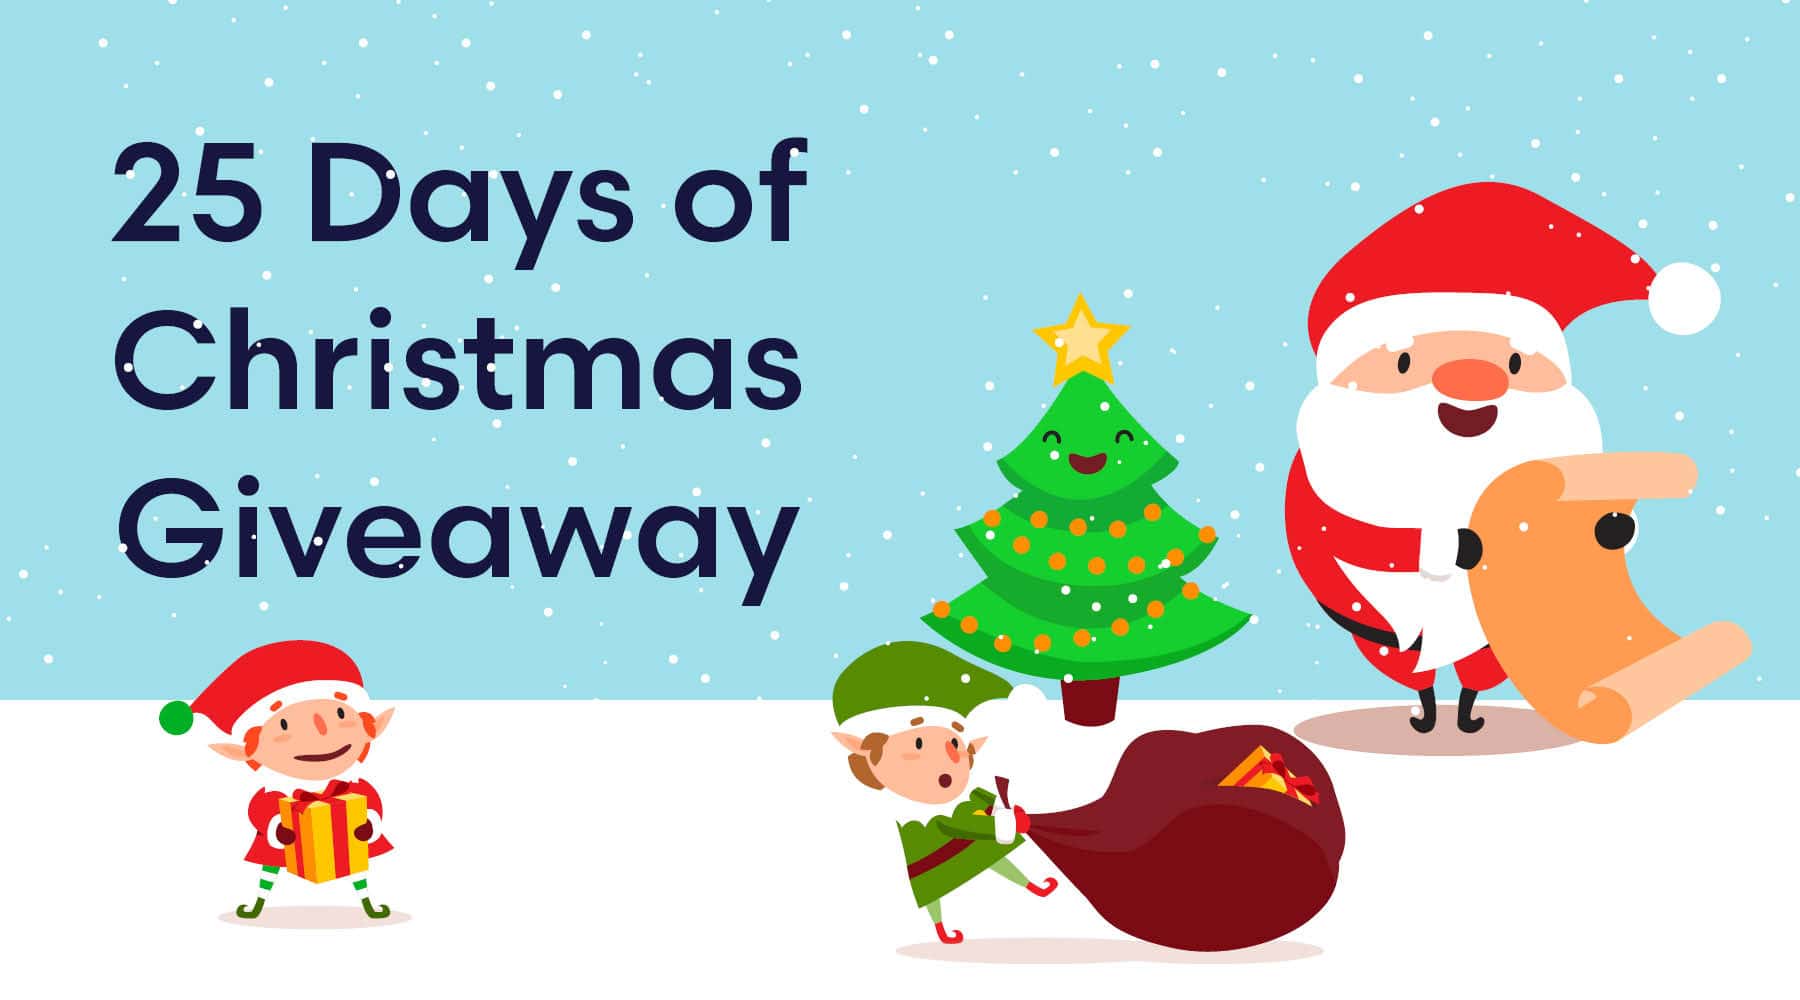 25 Days of Christmas Giveaway